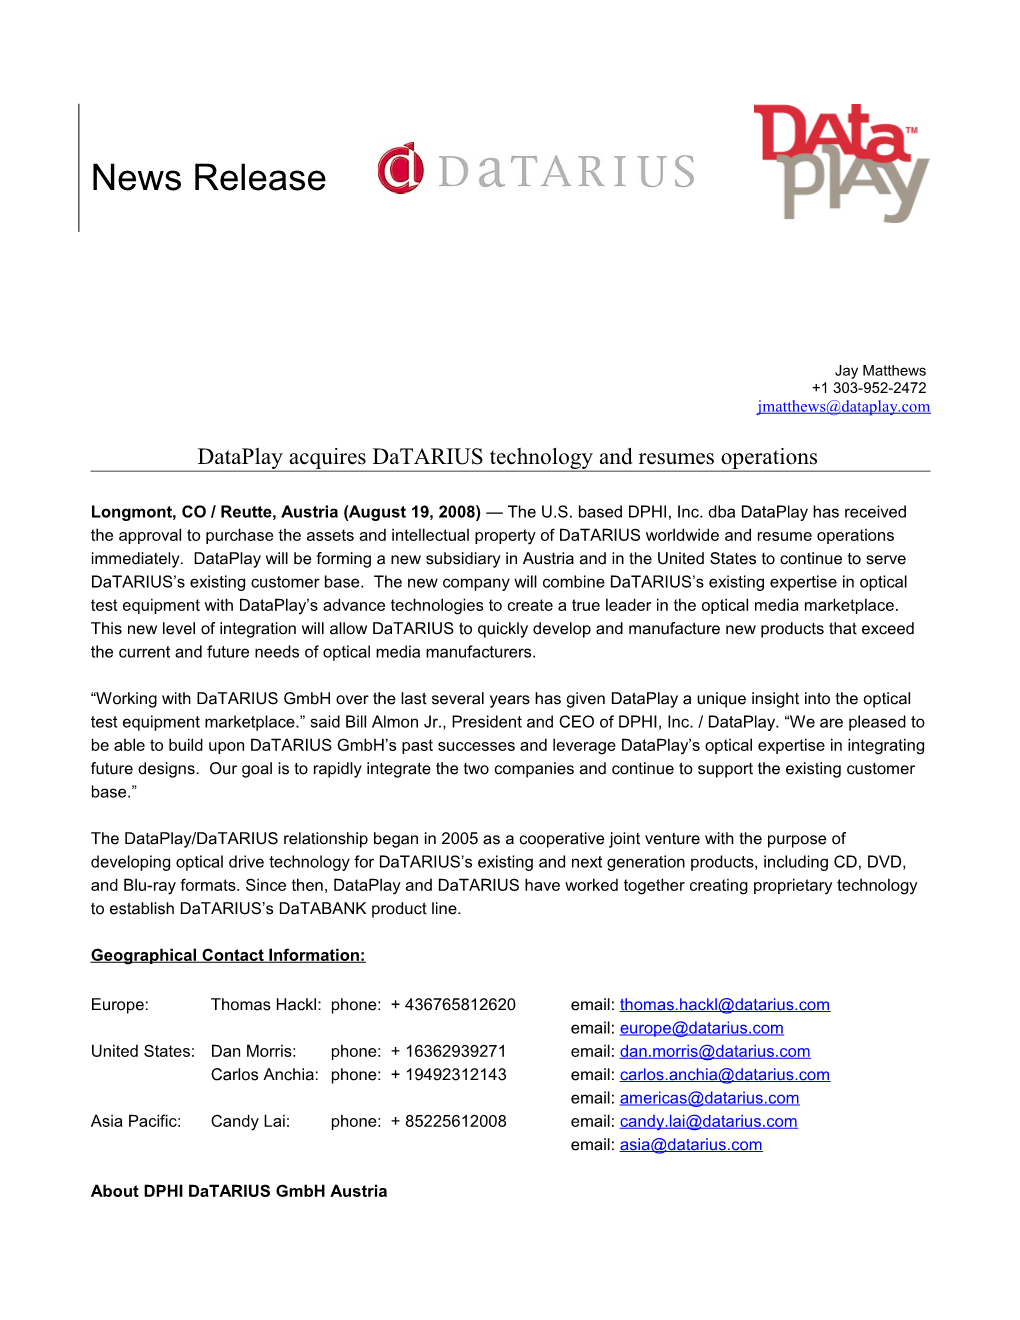 Dataplay Acquires Datarius Technology and Resumes Operations